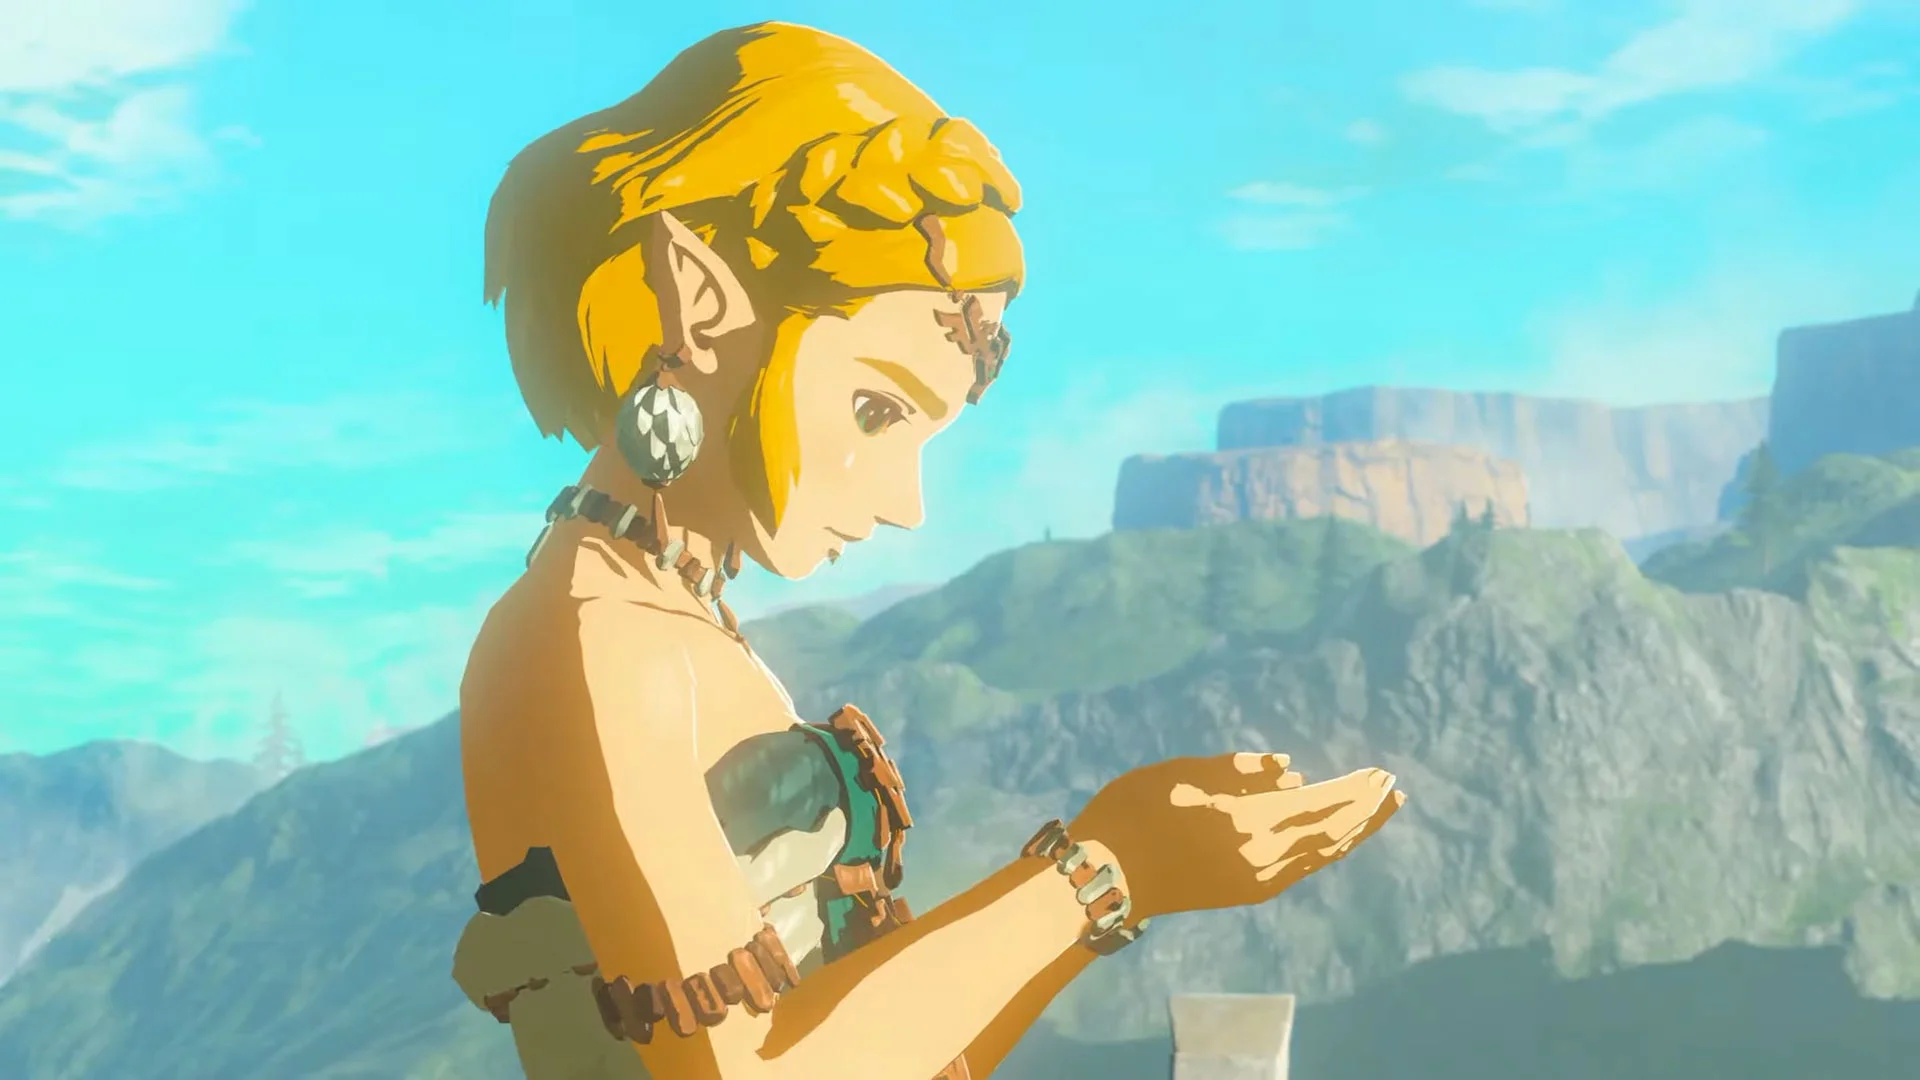 There is a new cool trailer for The Legend of Zelda: Tears of the Kingdom